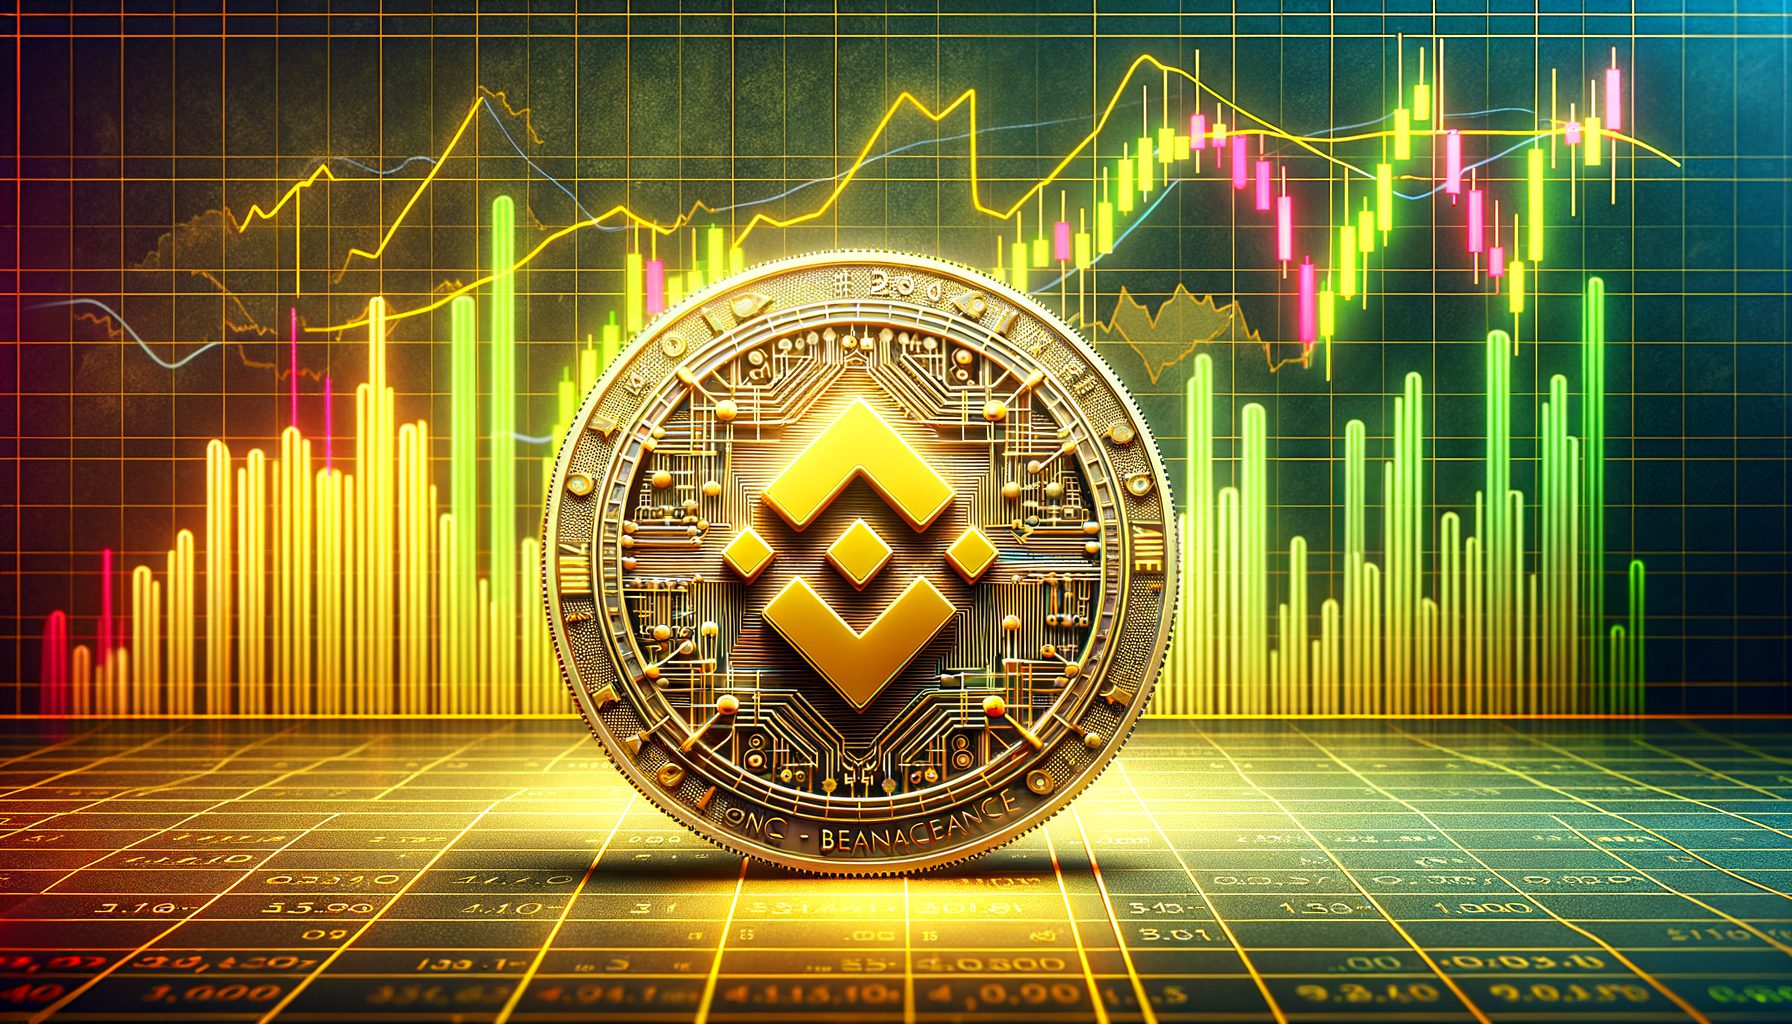 Top Binance Chain Coins To Buy For 2X Gains In June